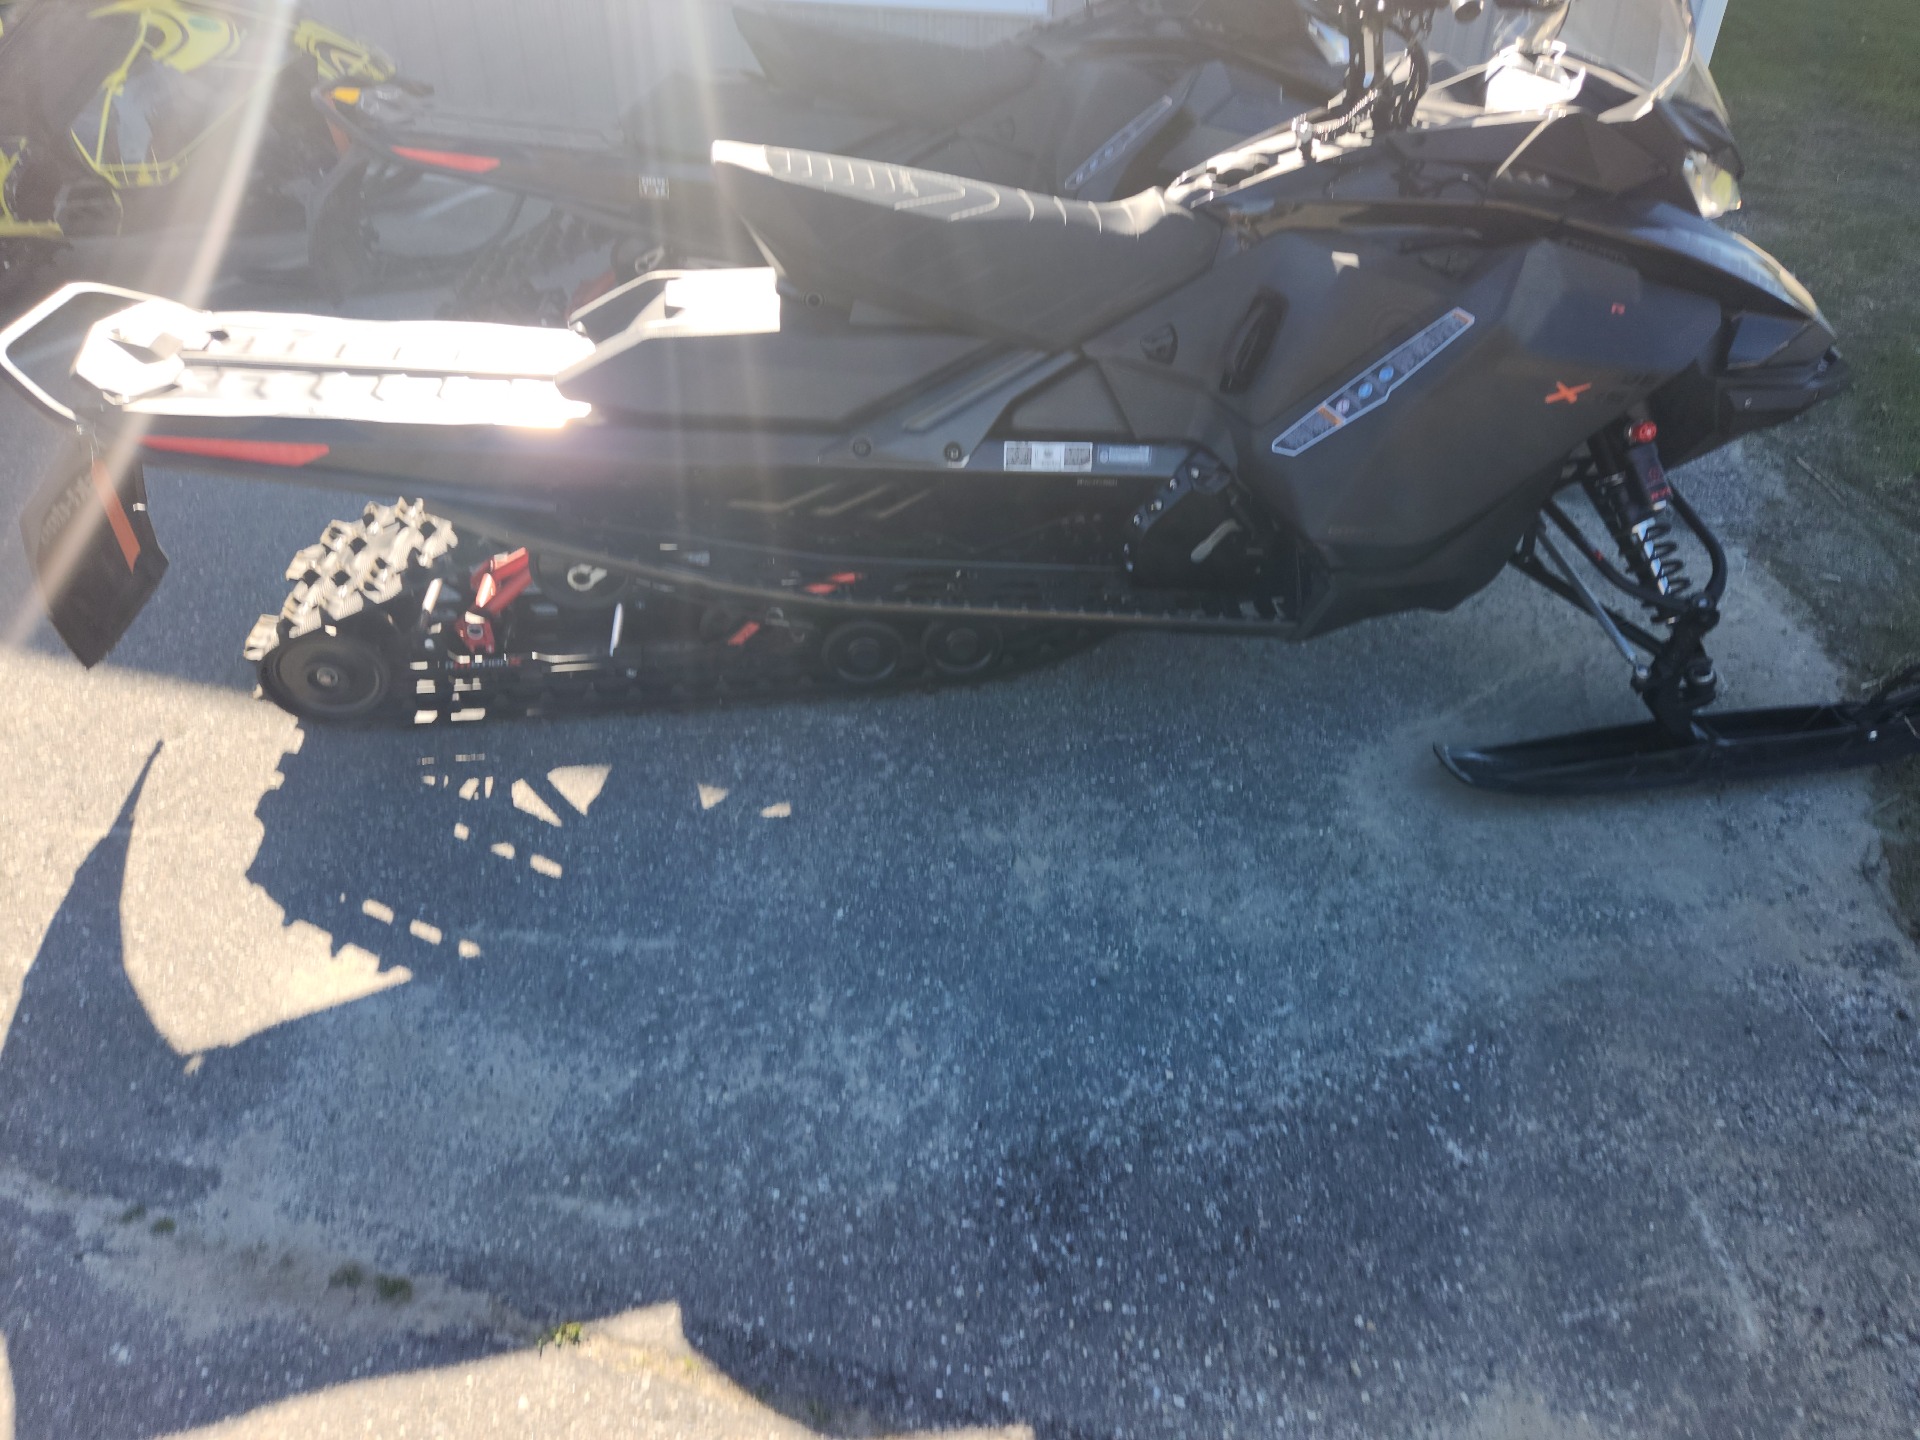 2022 Ski-Doo Renegade X-RS 600 E-TEC w/ Competition pkg. Ripsaw II 1.25 M.S. in Unity, Maine - Photo 1